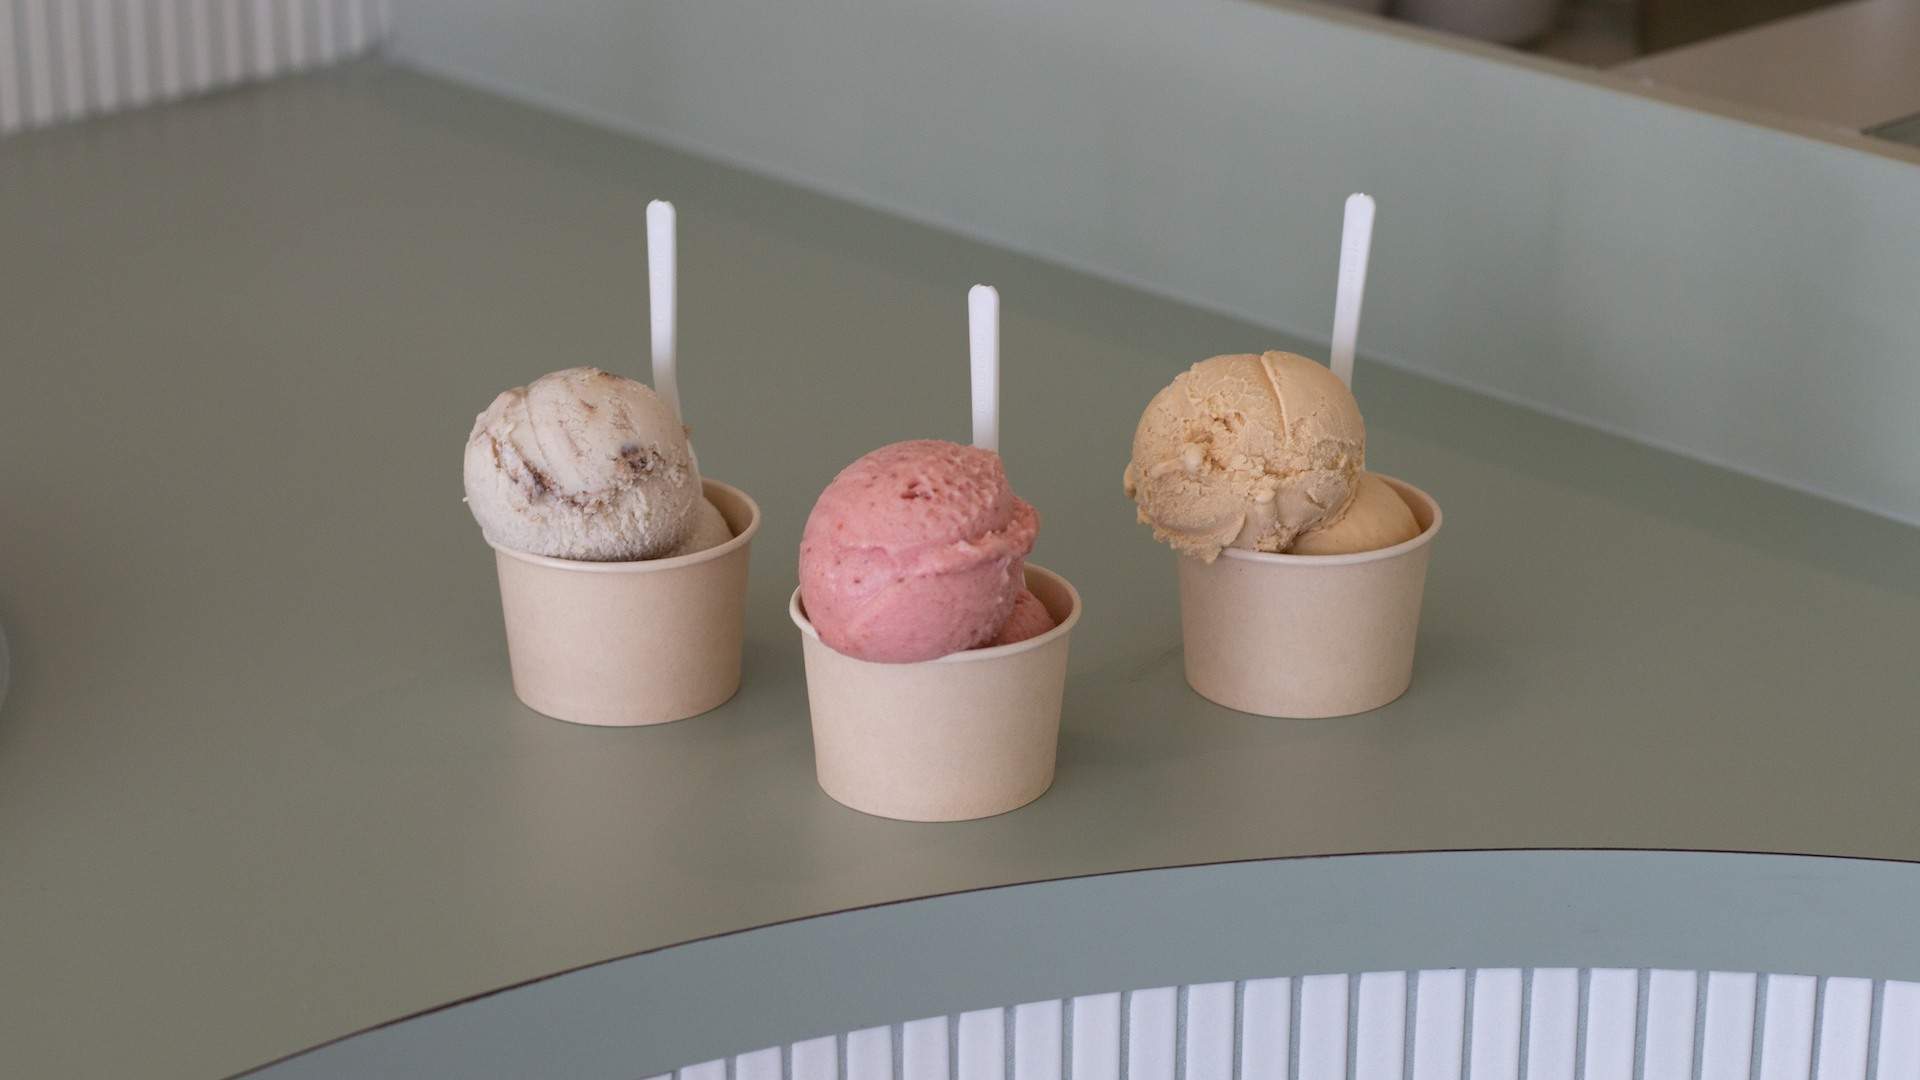 Billy Van Creamery - home to some of the best ice cream dn gelato in Melbourne